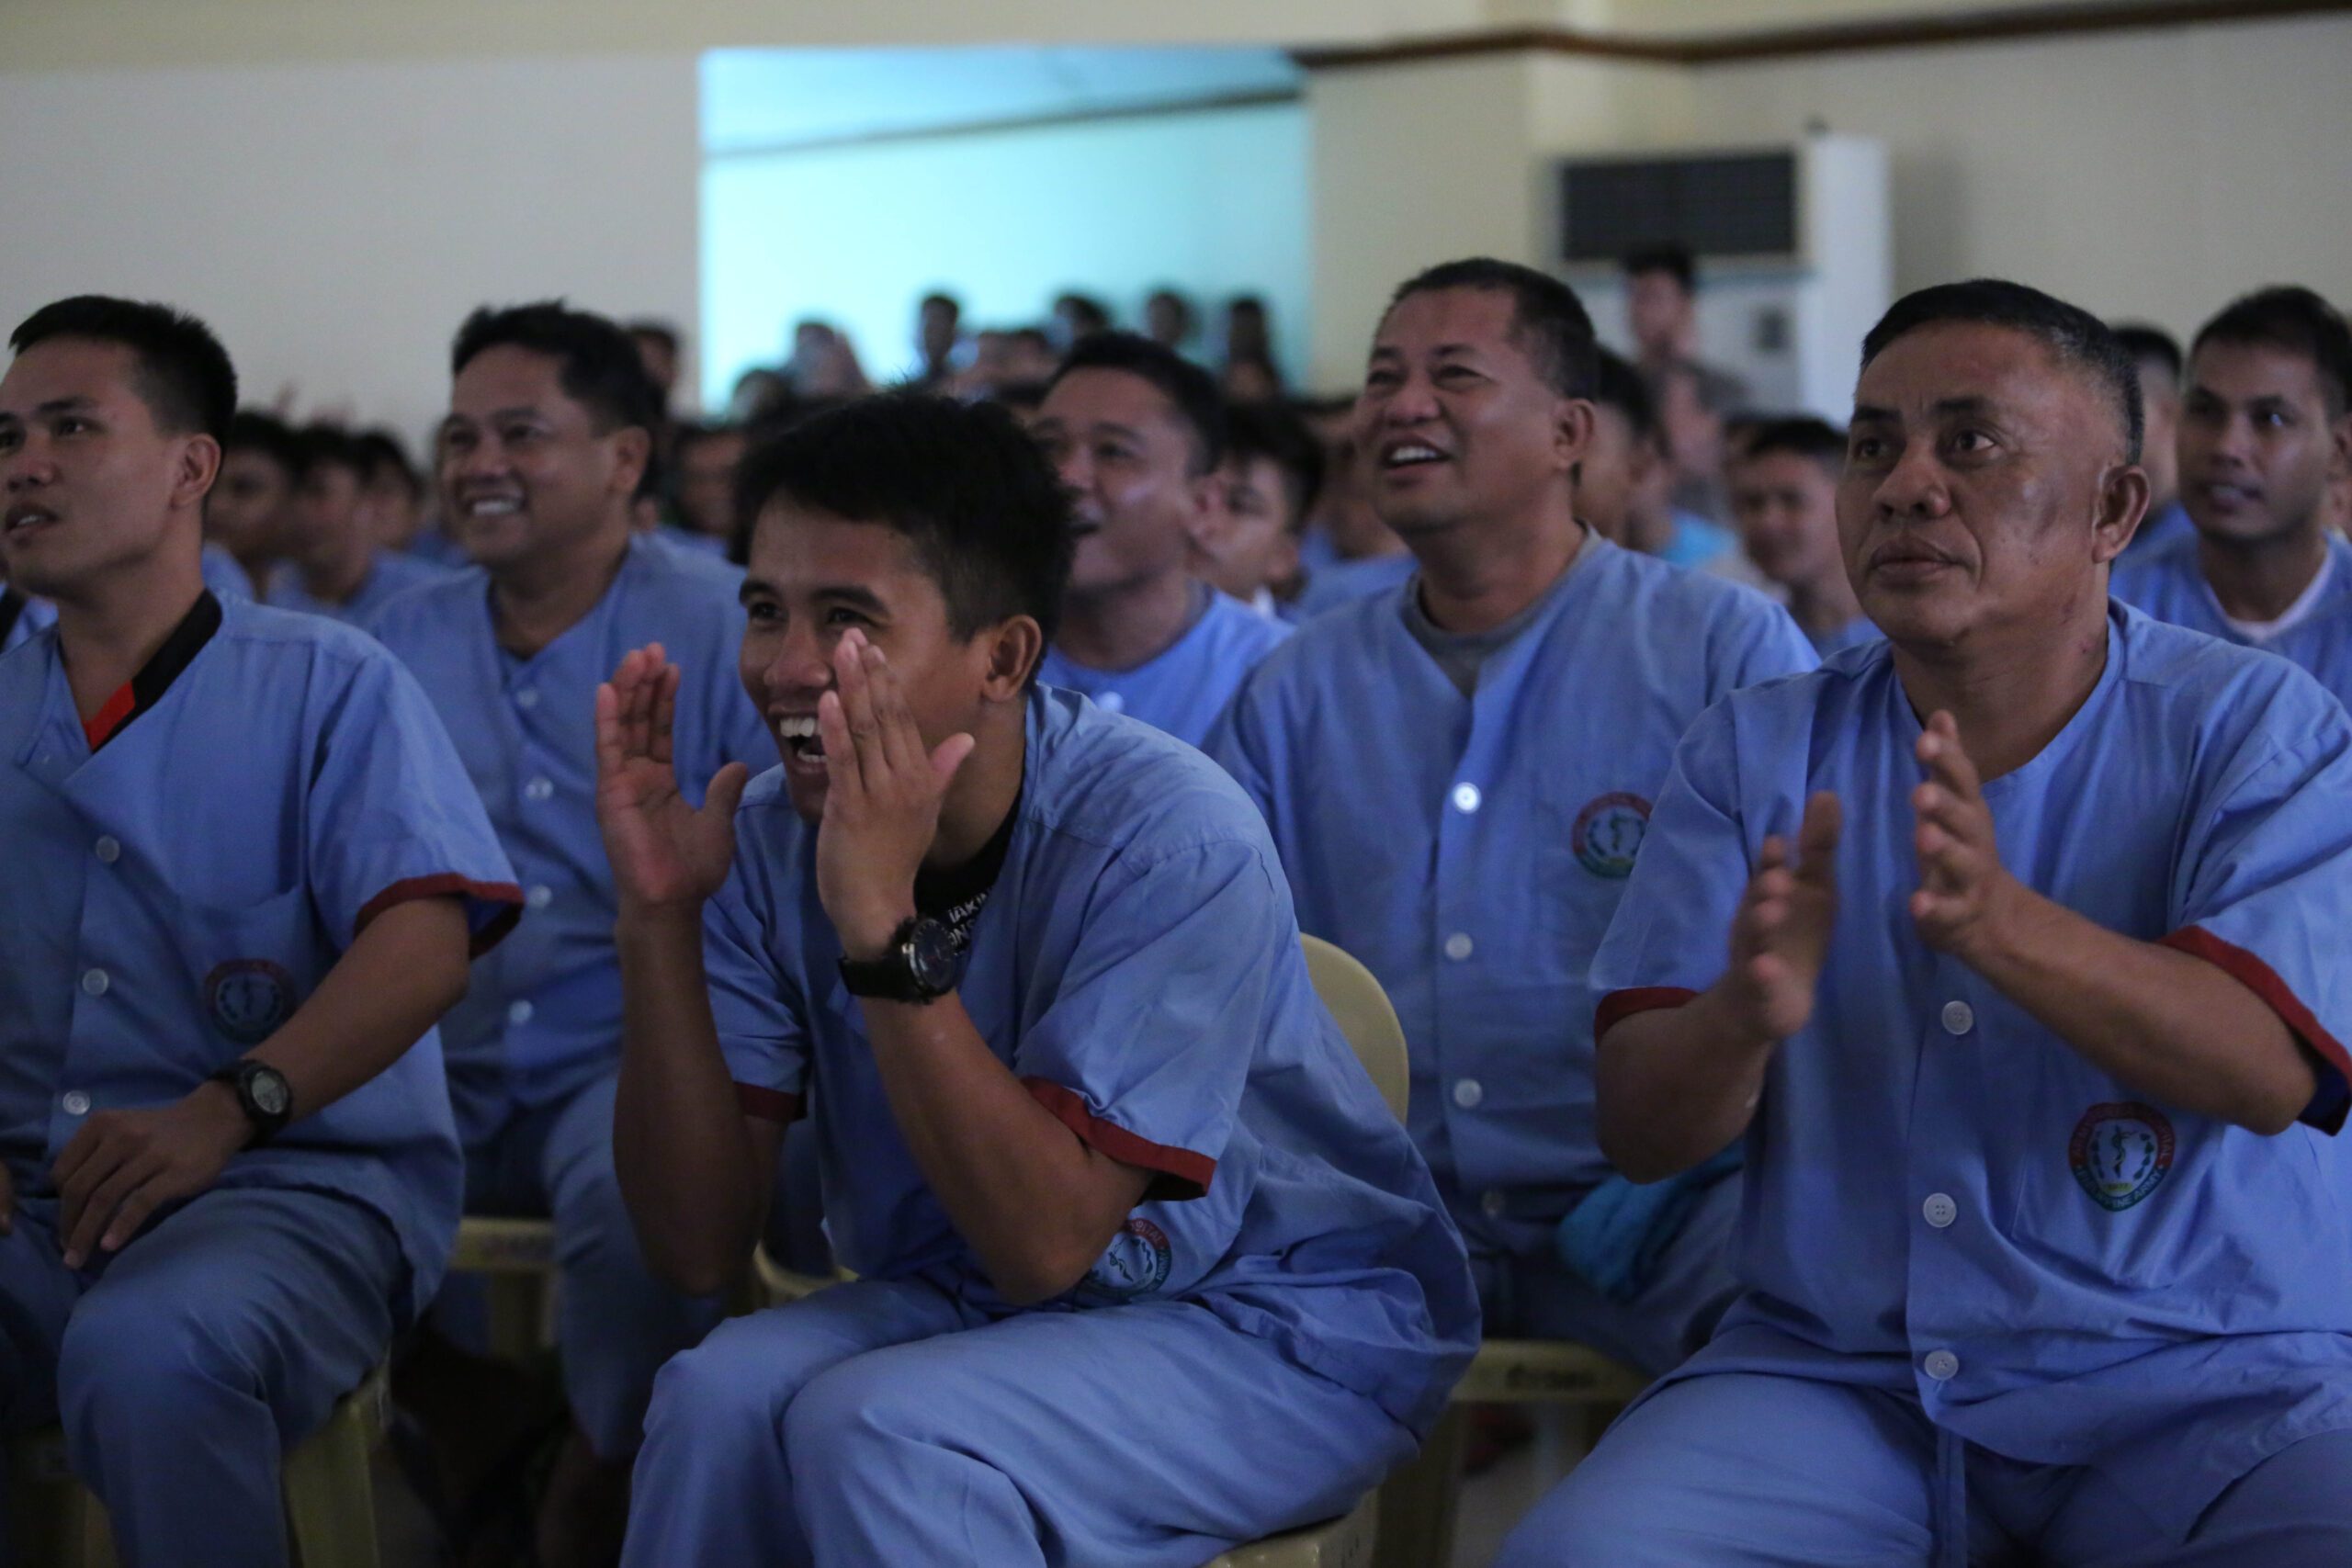 IN PHOTOS: Injured soldiers cheer for Pacquiao